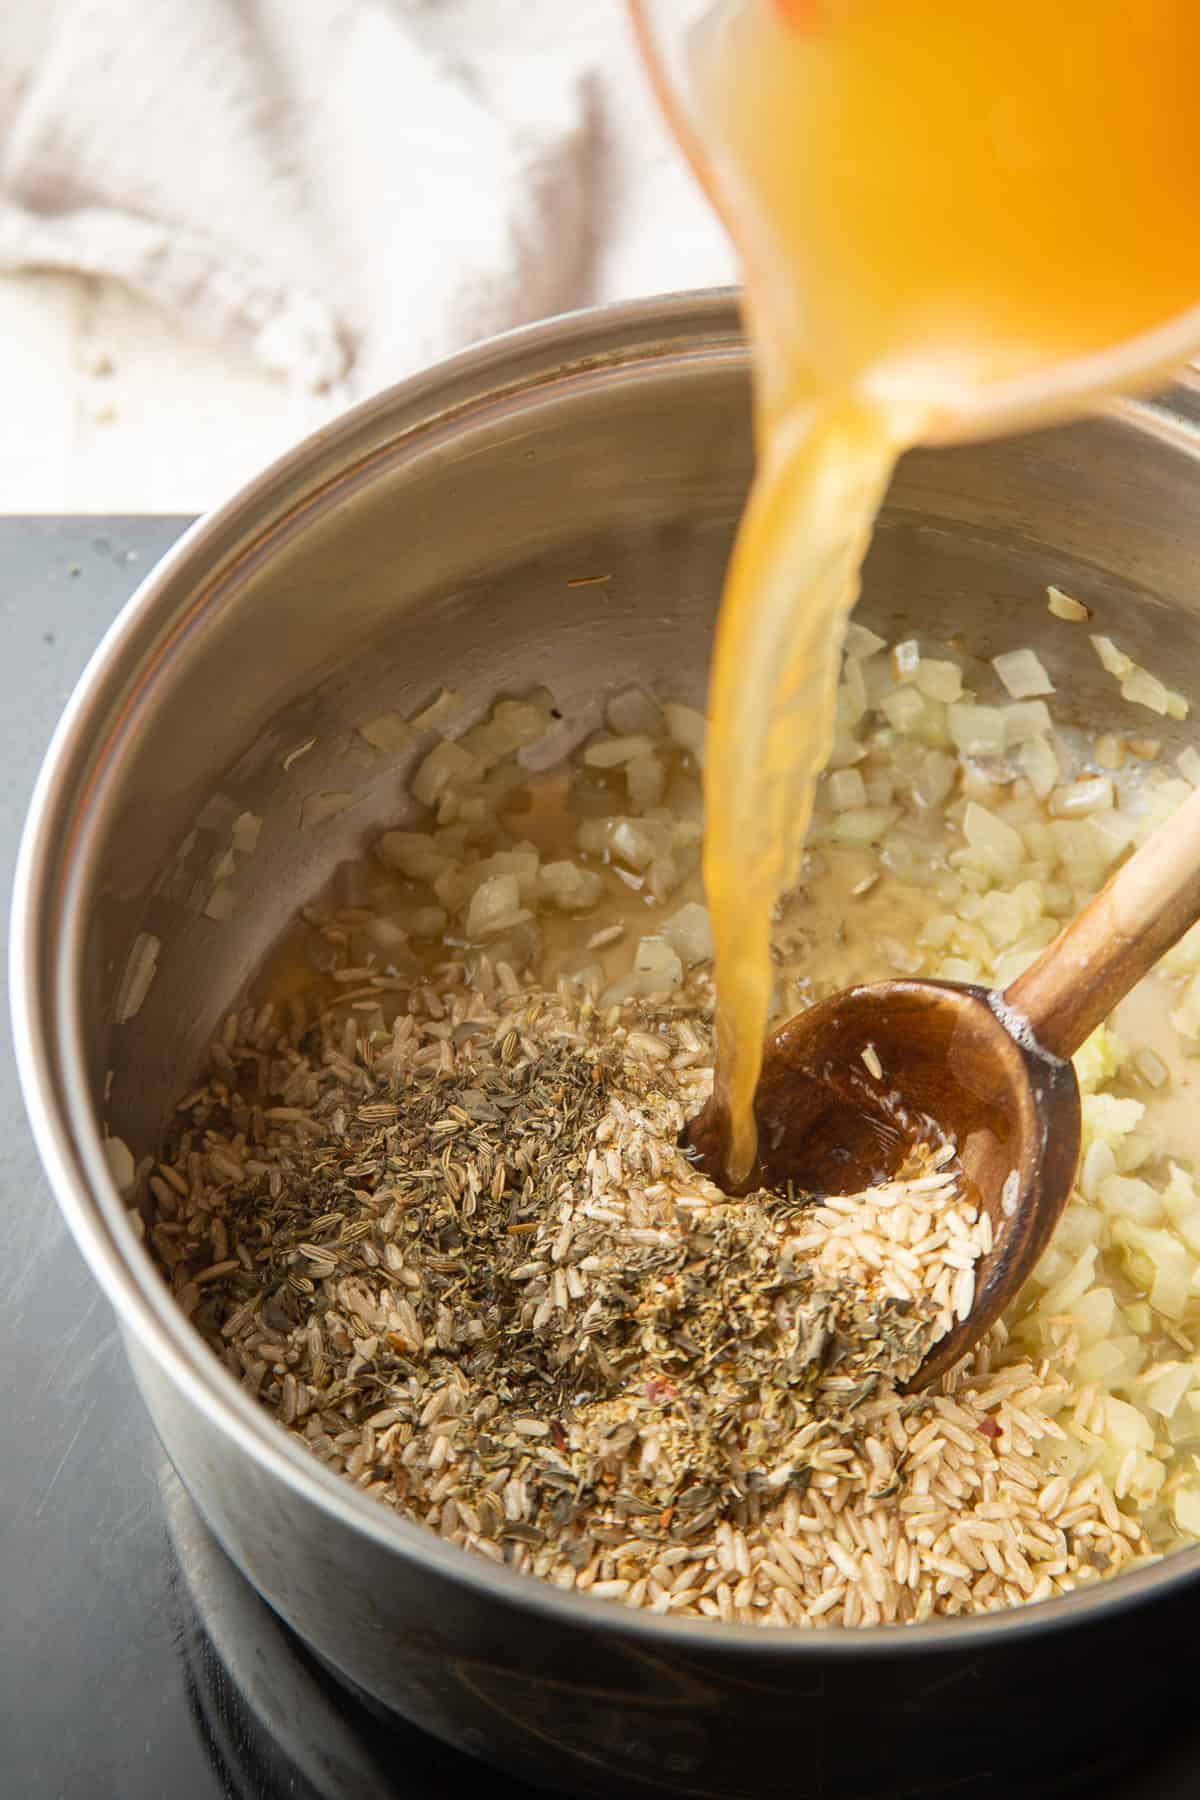 Broth being poured into a saucepan with rice, onions and herbs.